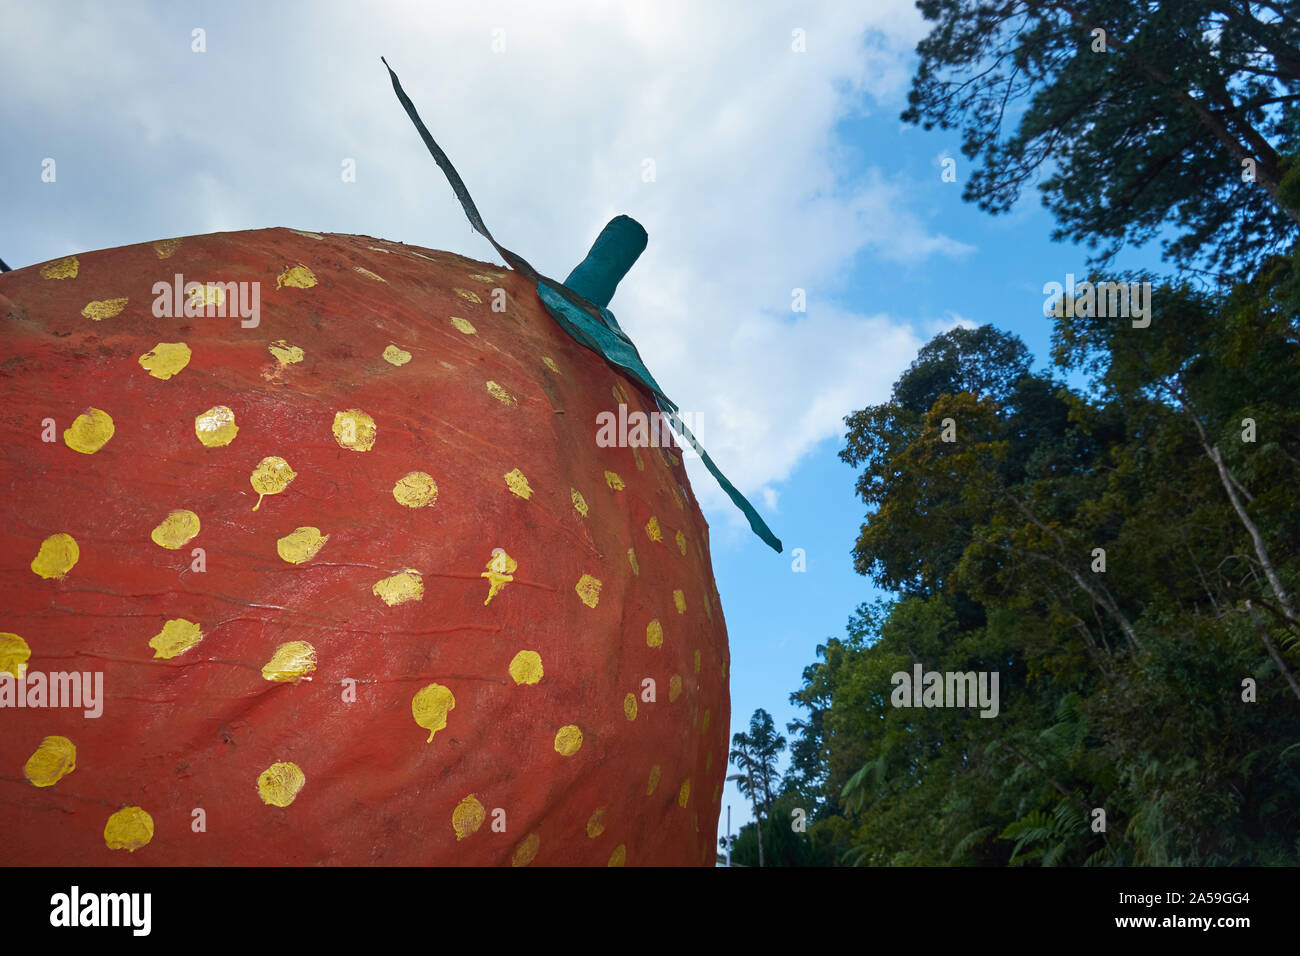 A large strawberry sculpture marks the entrance to a strawberry nursery and seller in Fraser's Hill, Malaysia. Strawberries grow well in the area. Stock Photo